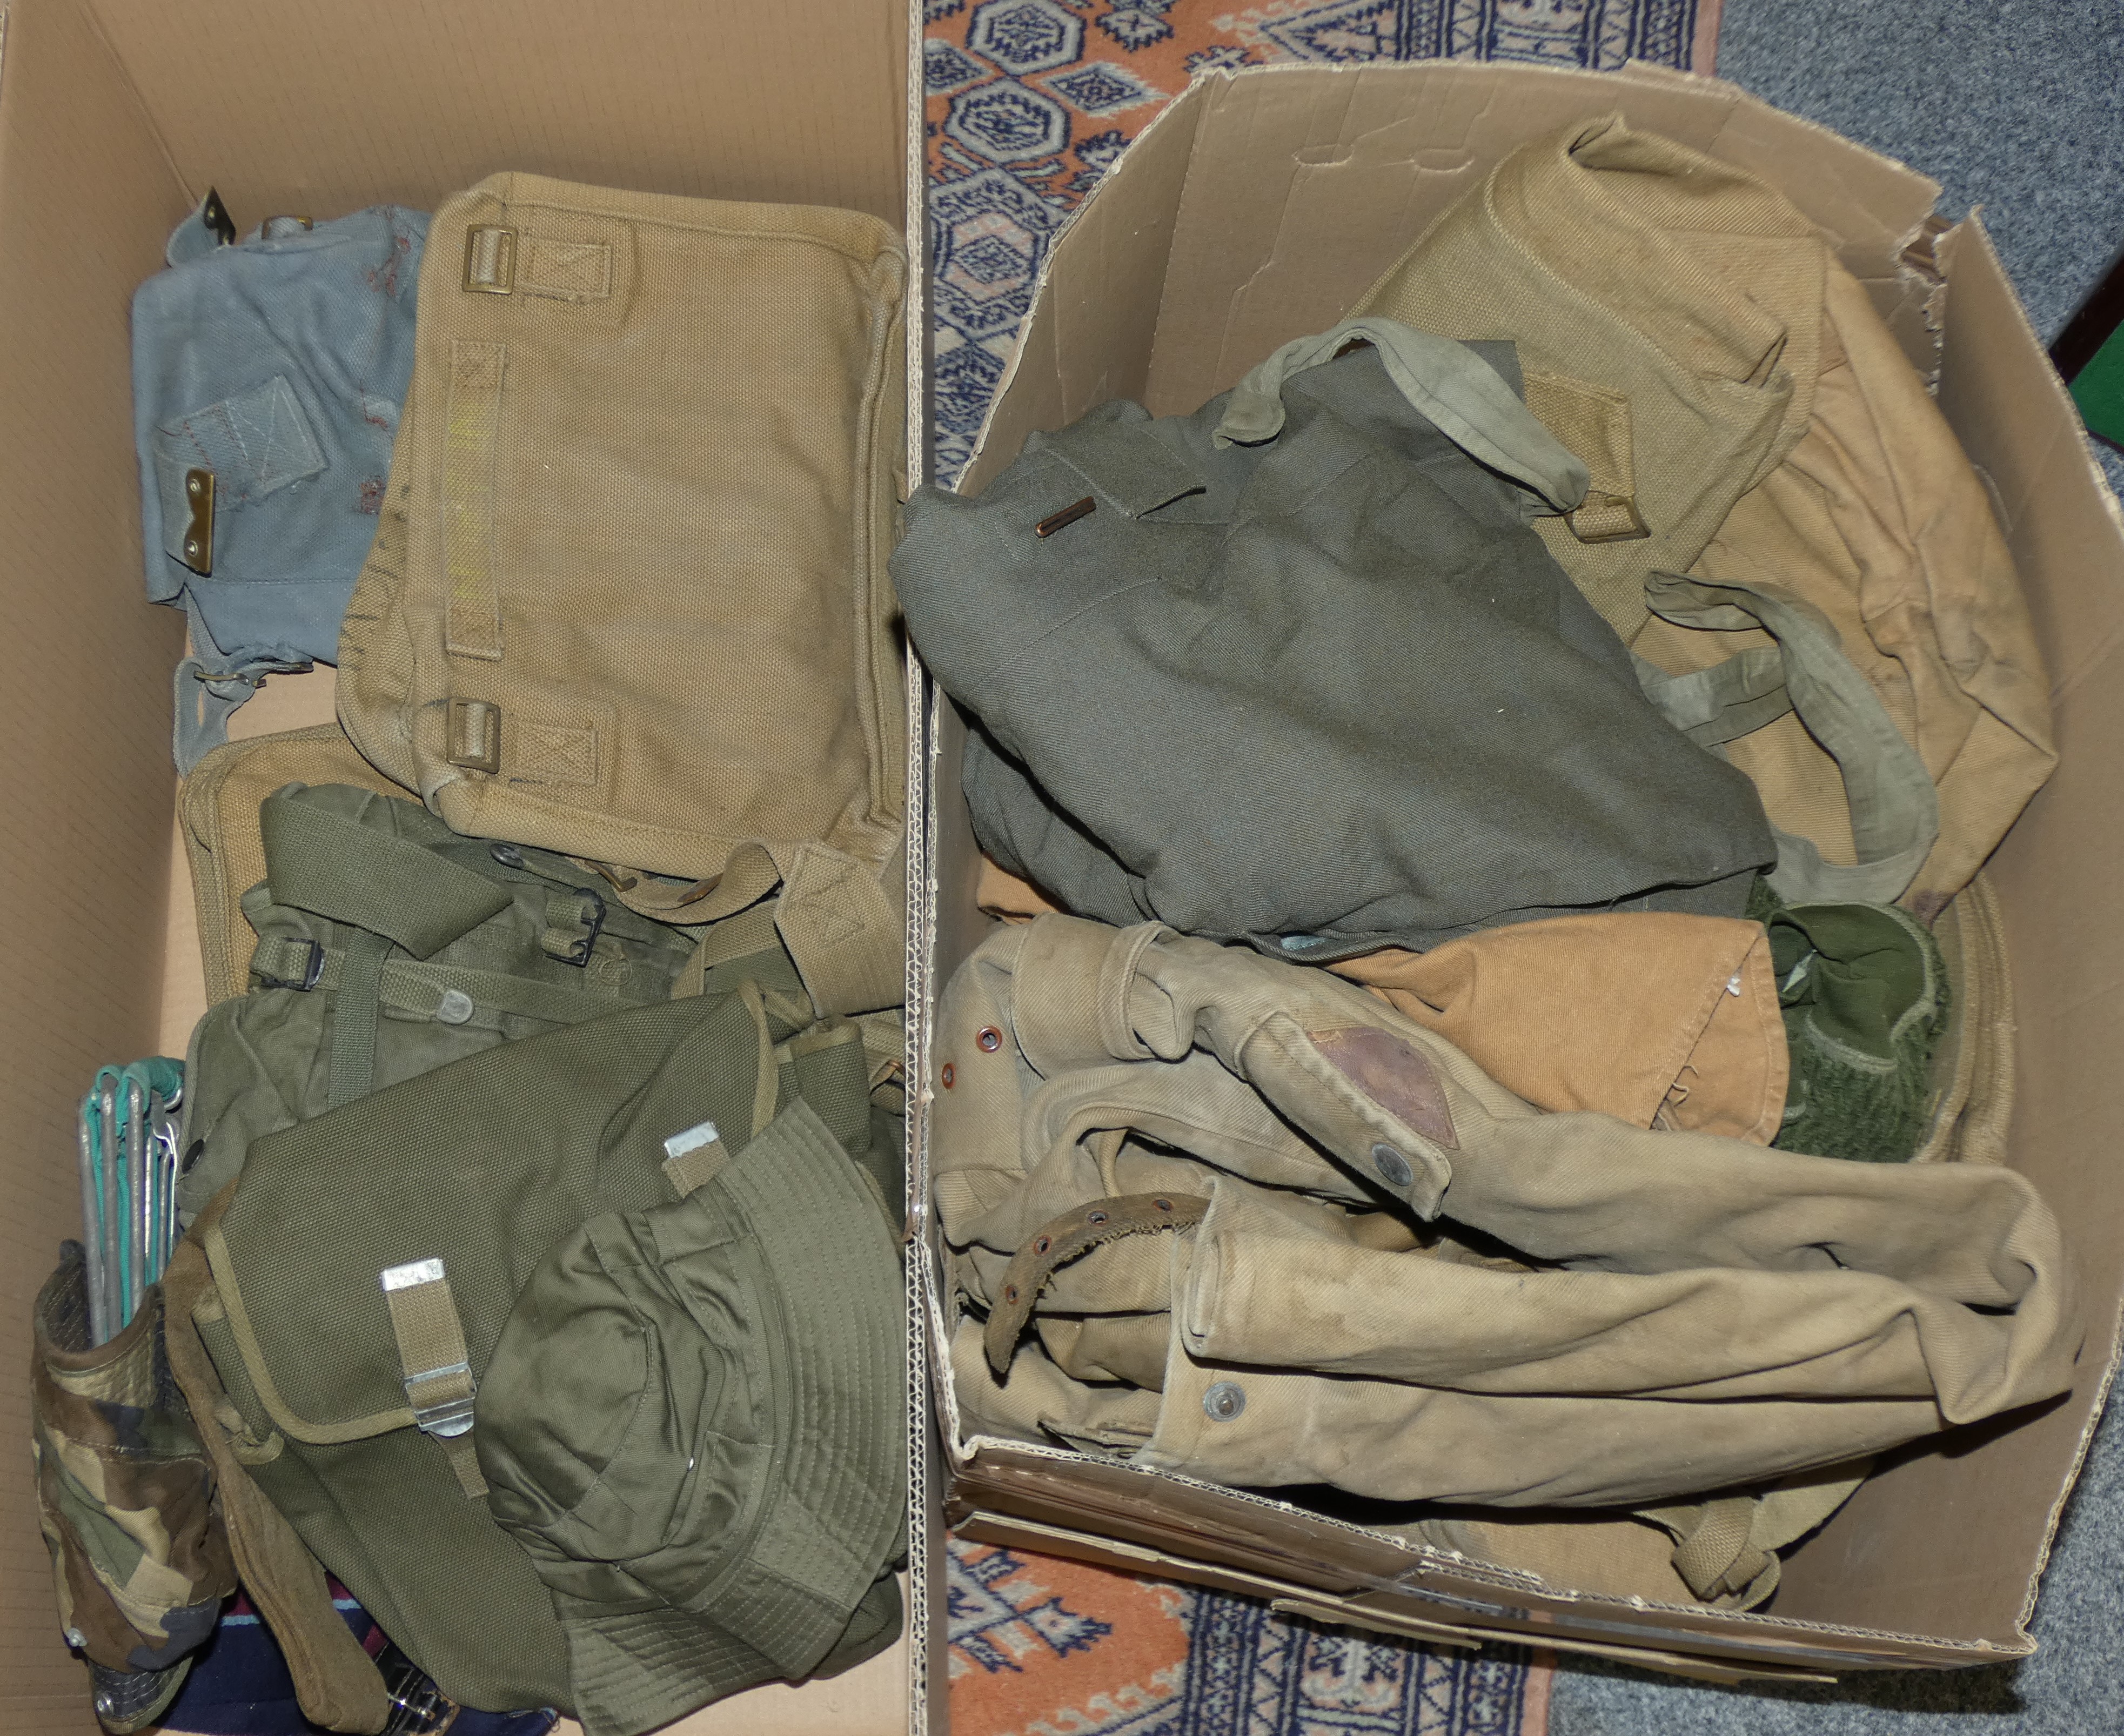 Military back packs and clothing